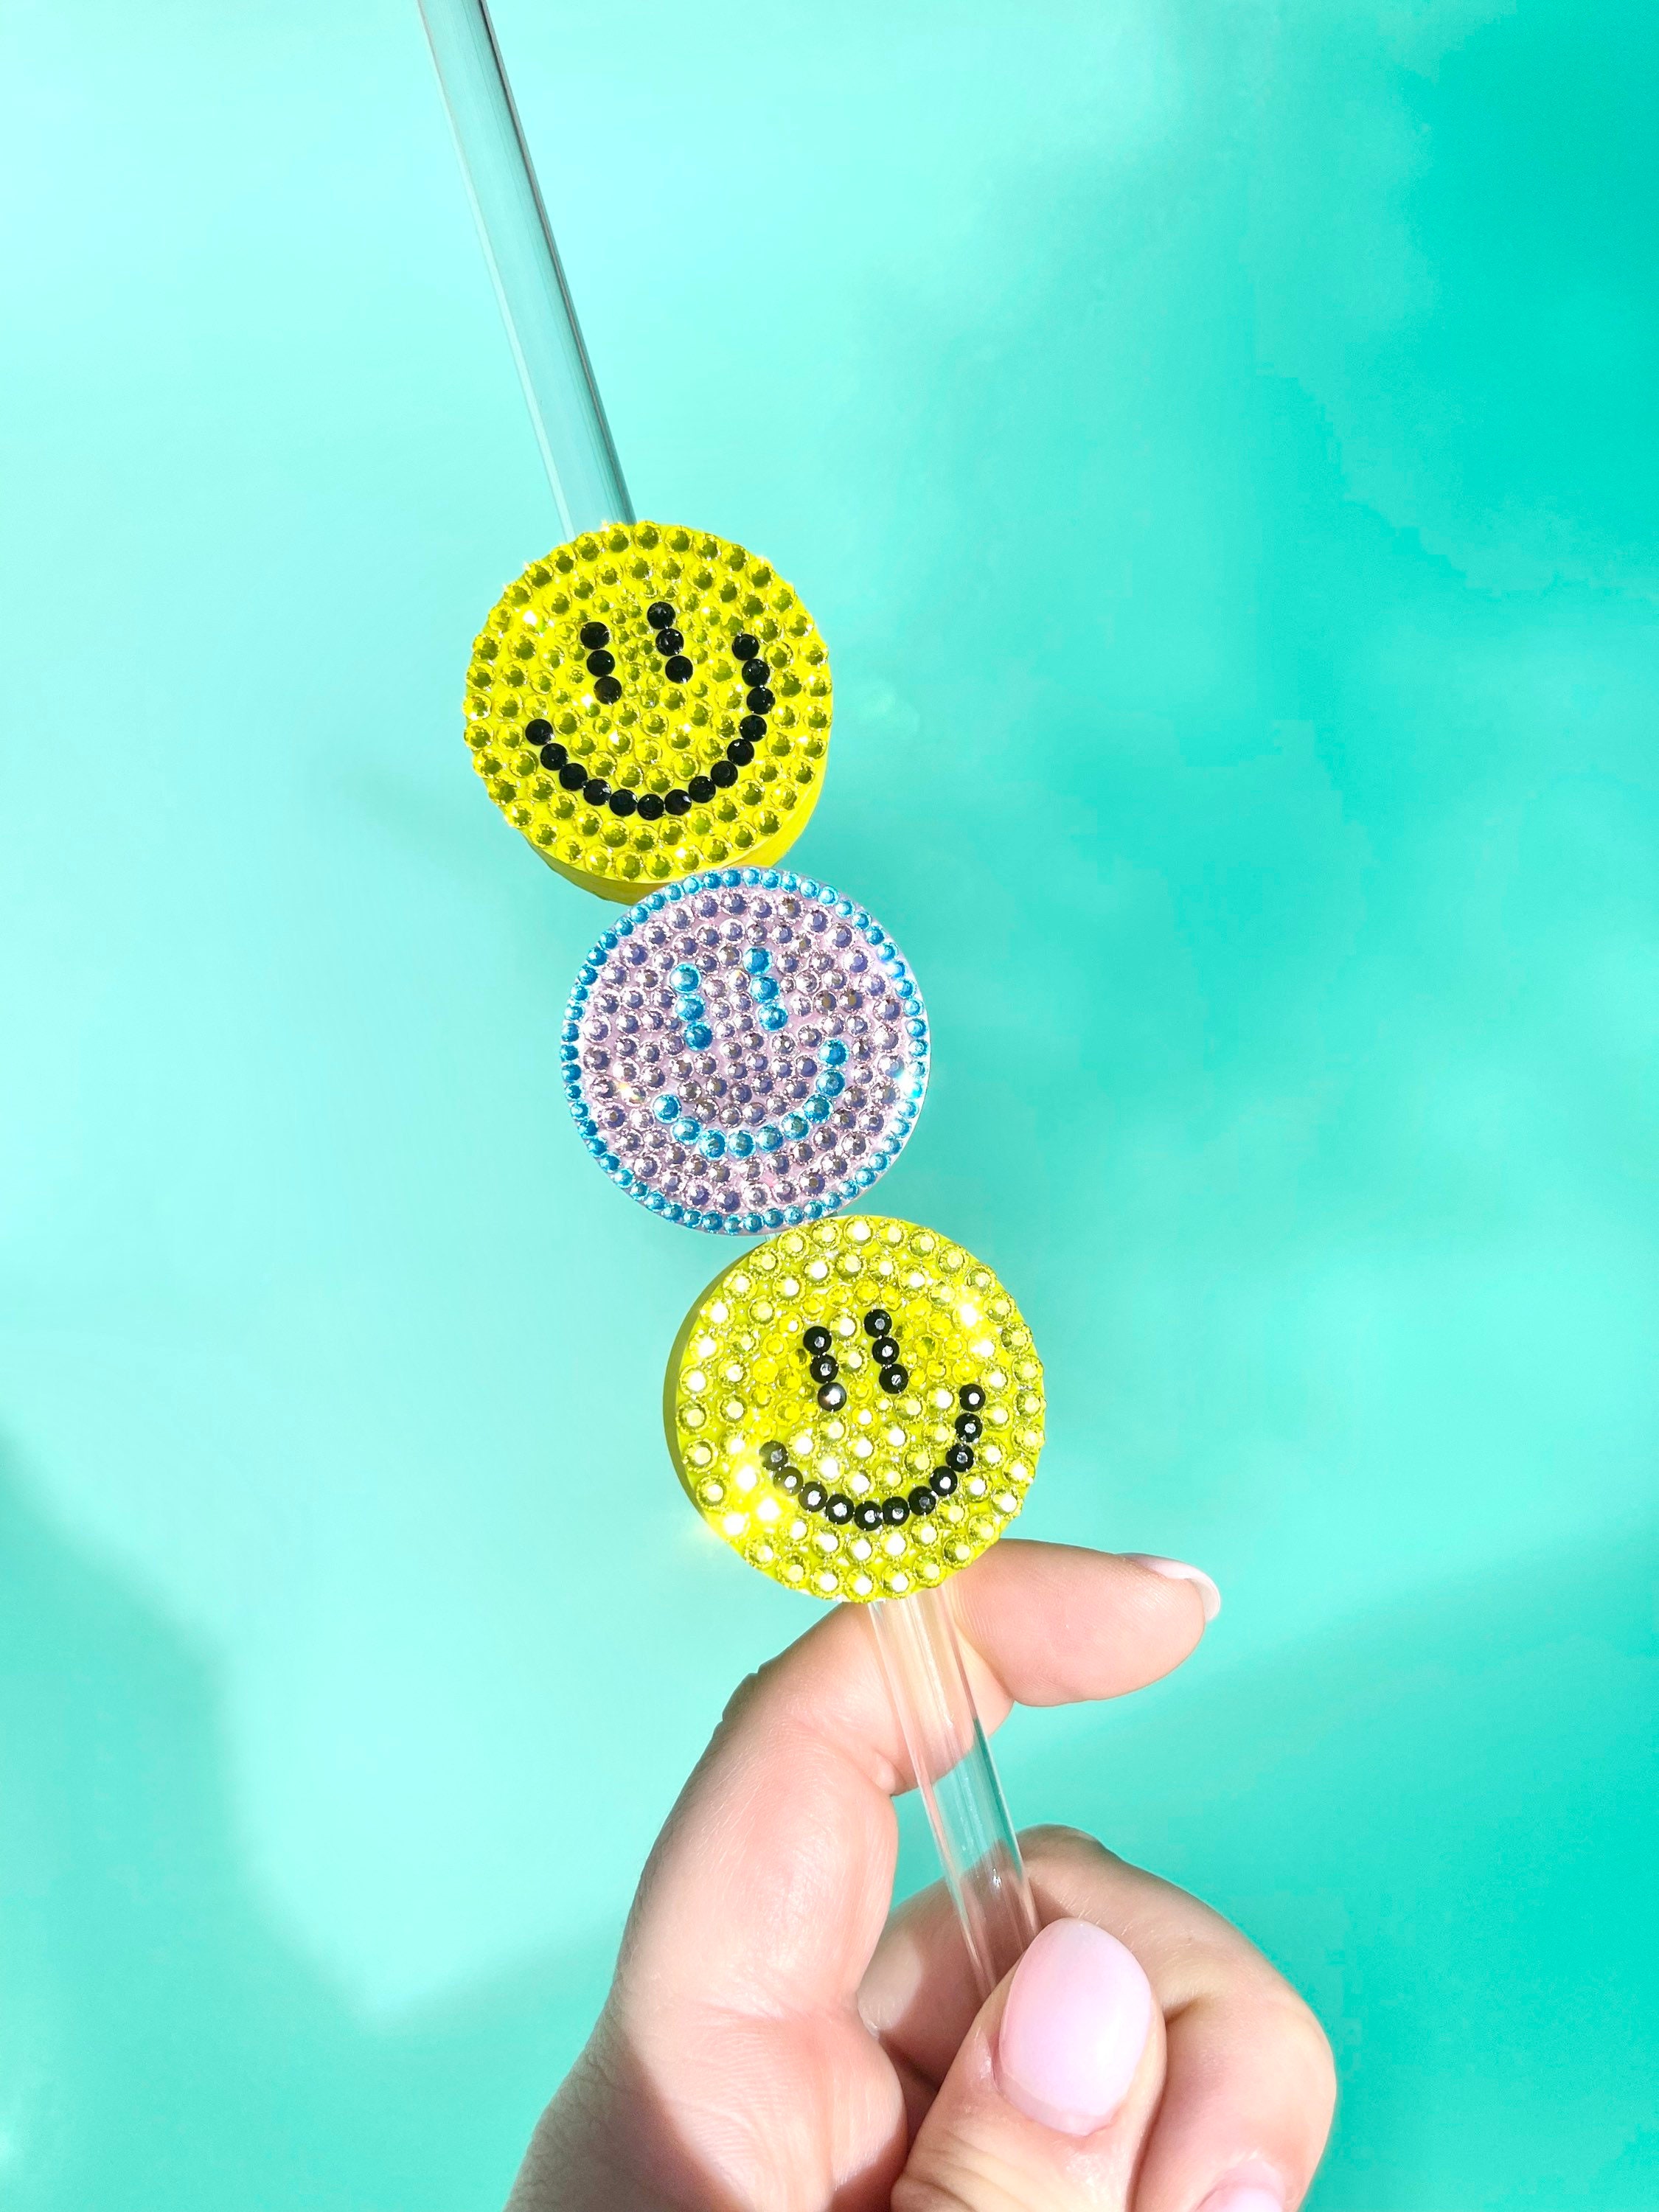 Happy face straw topper keep smiling smiley face fits Stanley